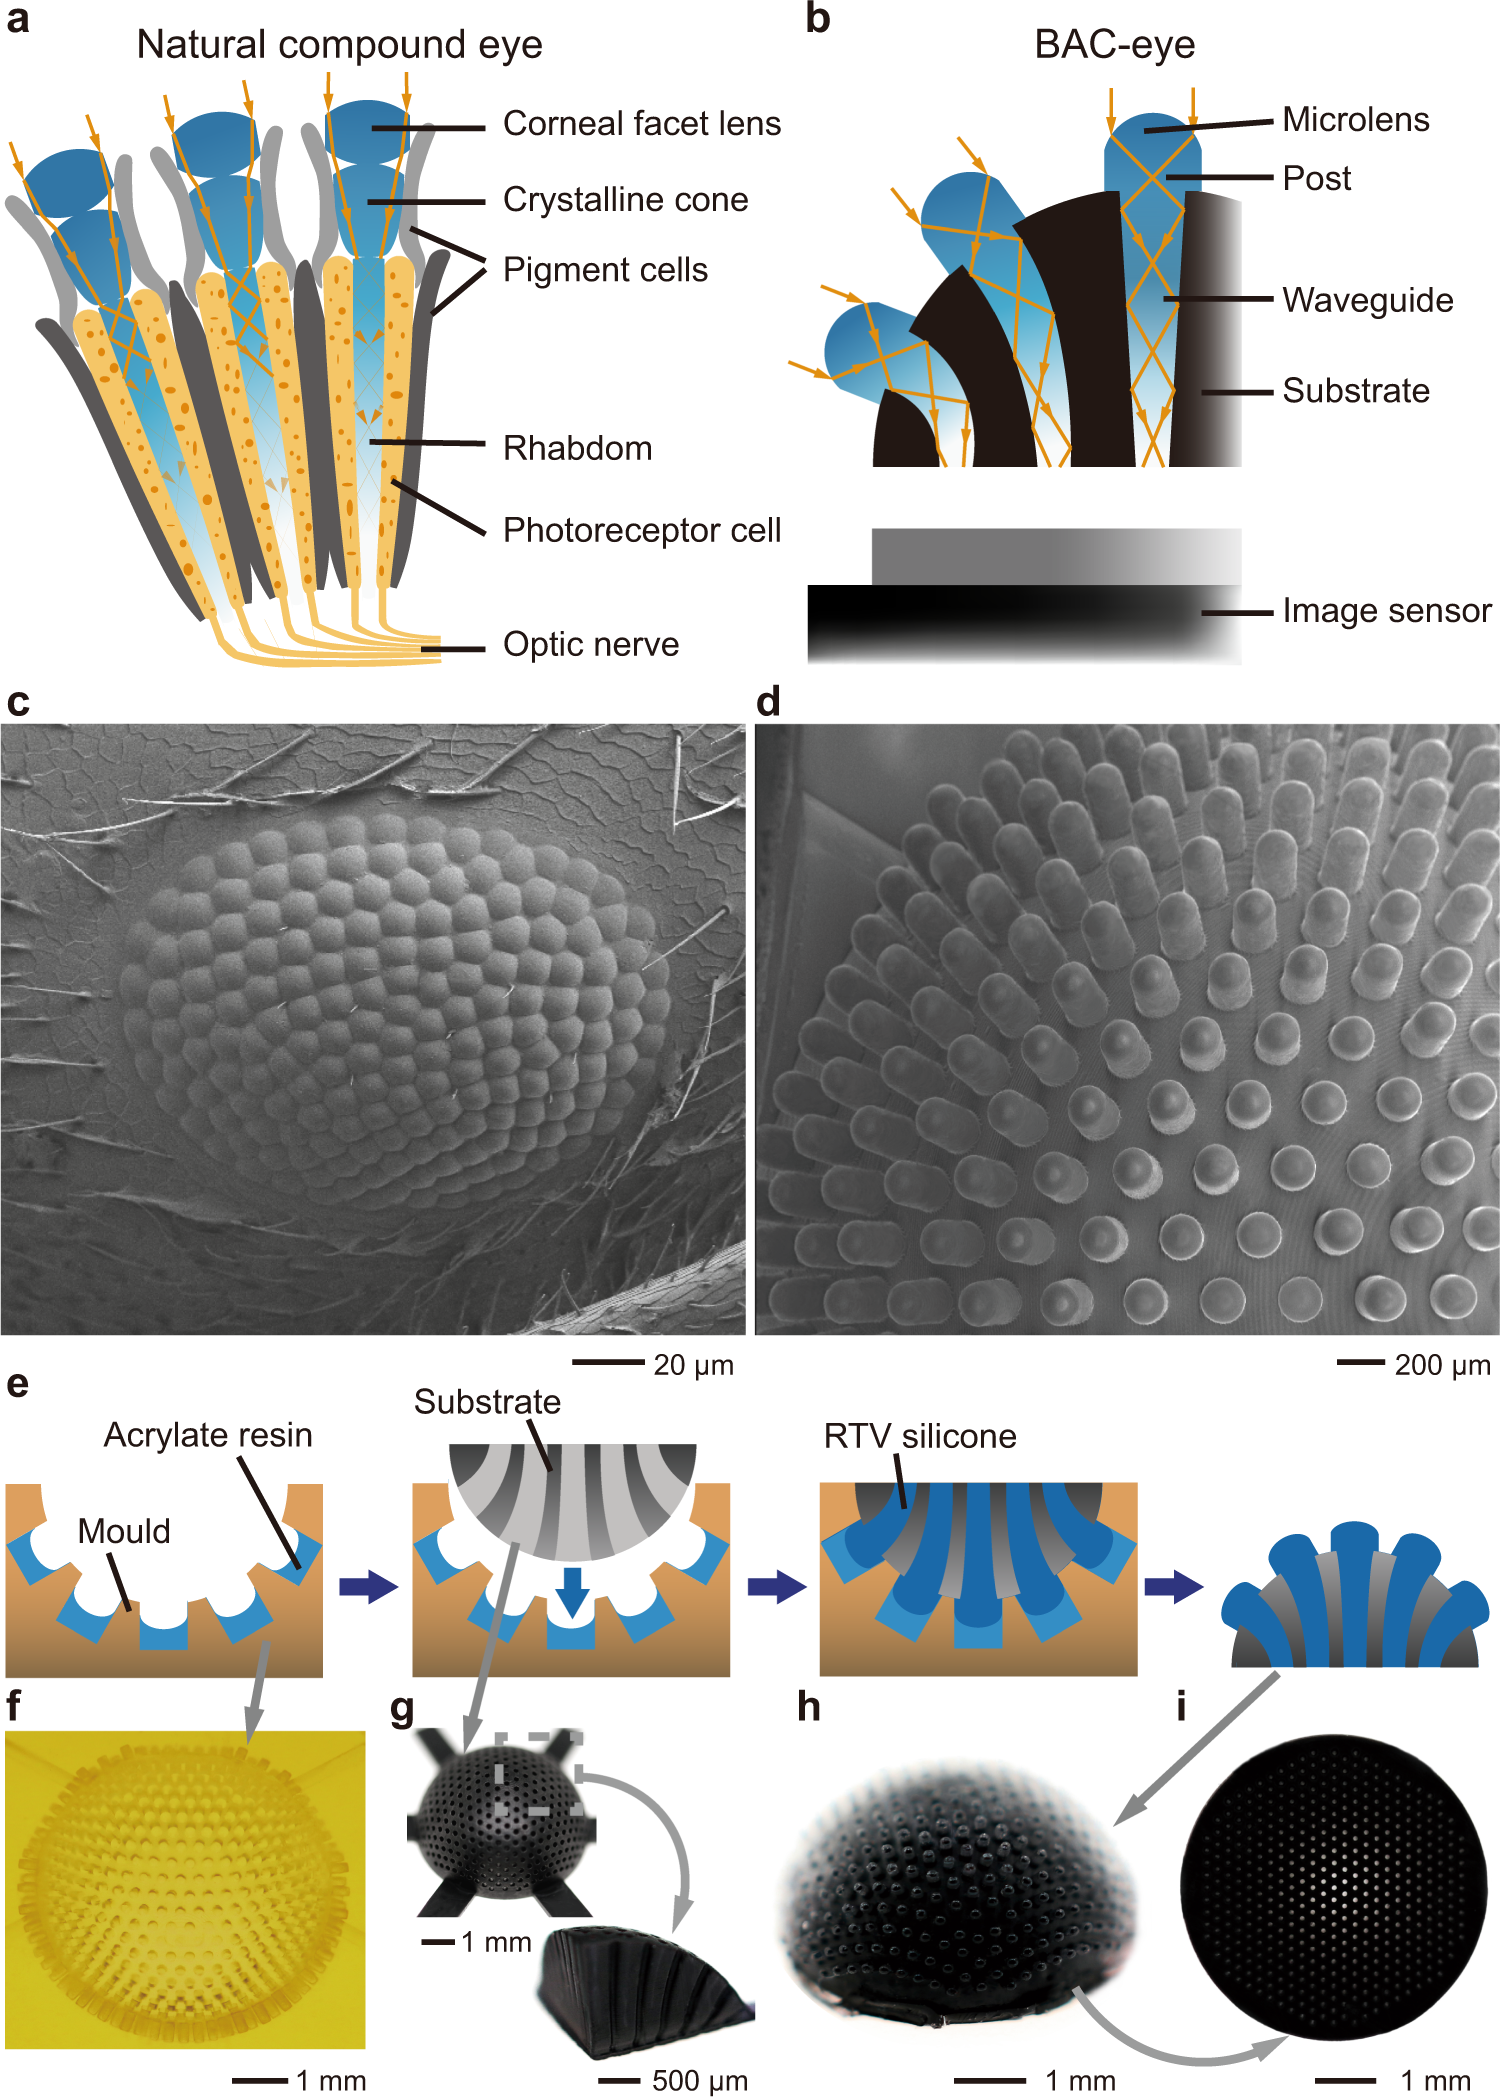 Biomimetic apposition compound eye fabricated using microfluidic-assisted  3D printing